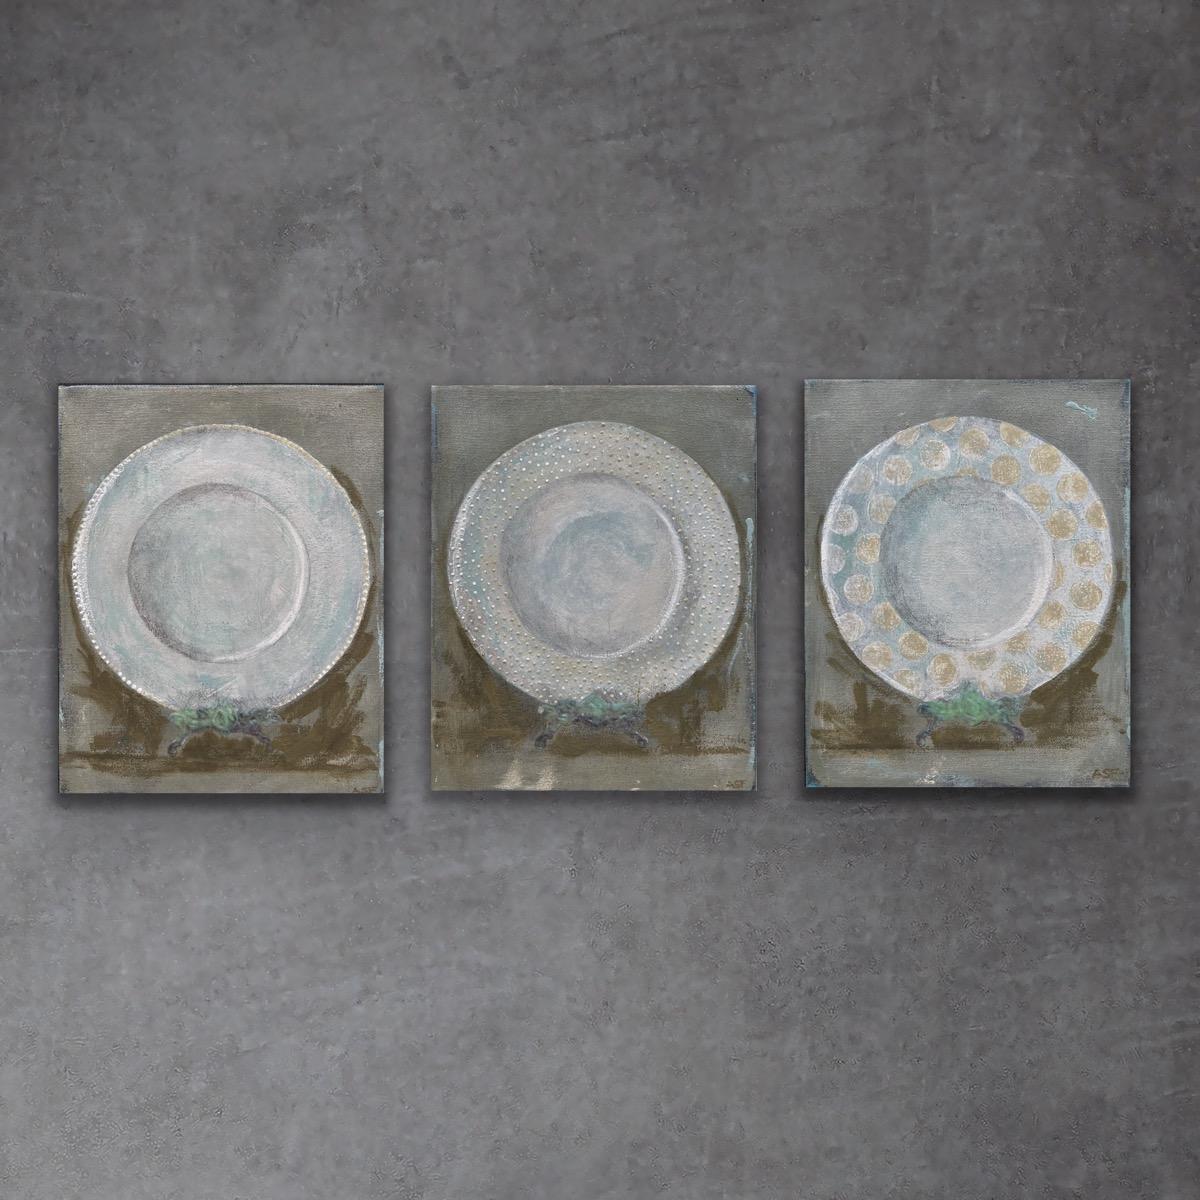 Dinner Party - 3 Paintings, Still Life Series, 8"x10" Each, Green/Beige, White 